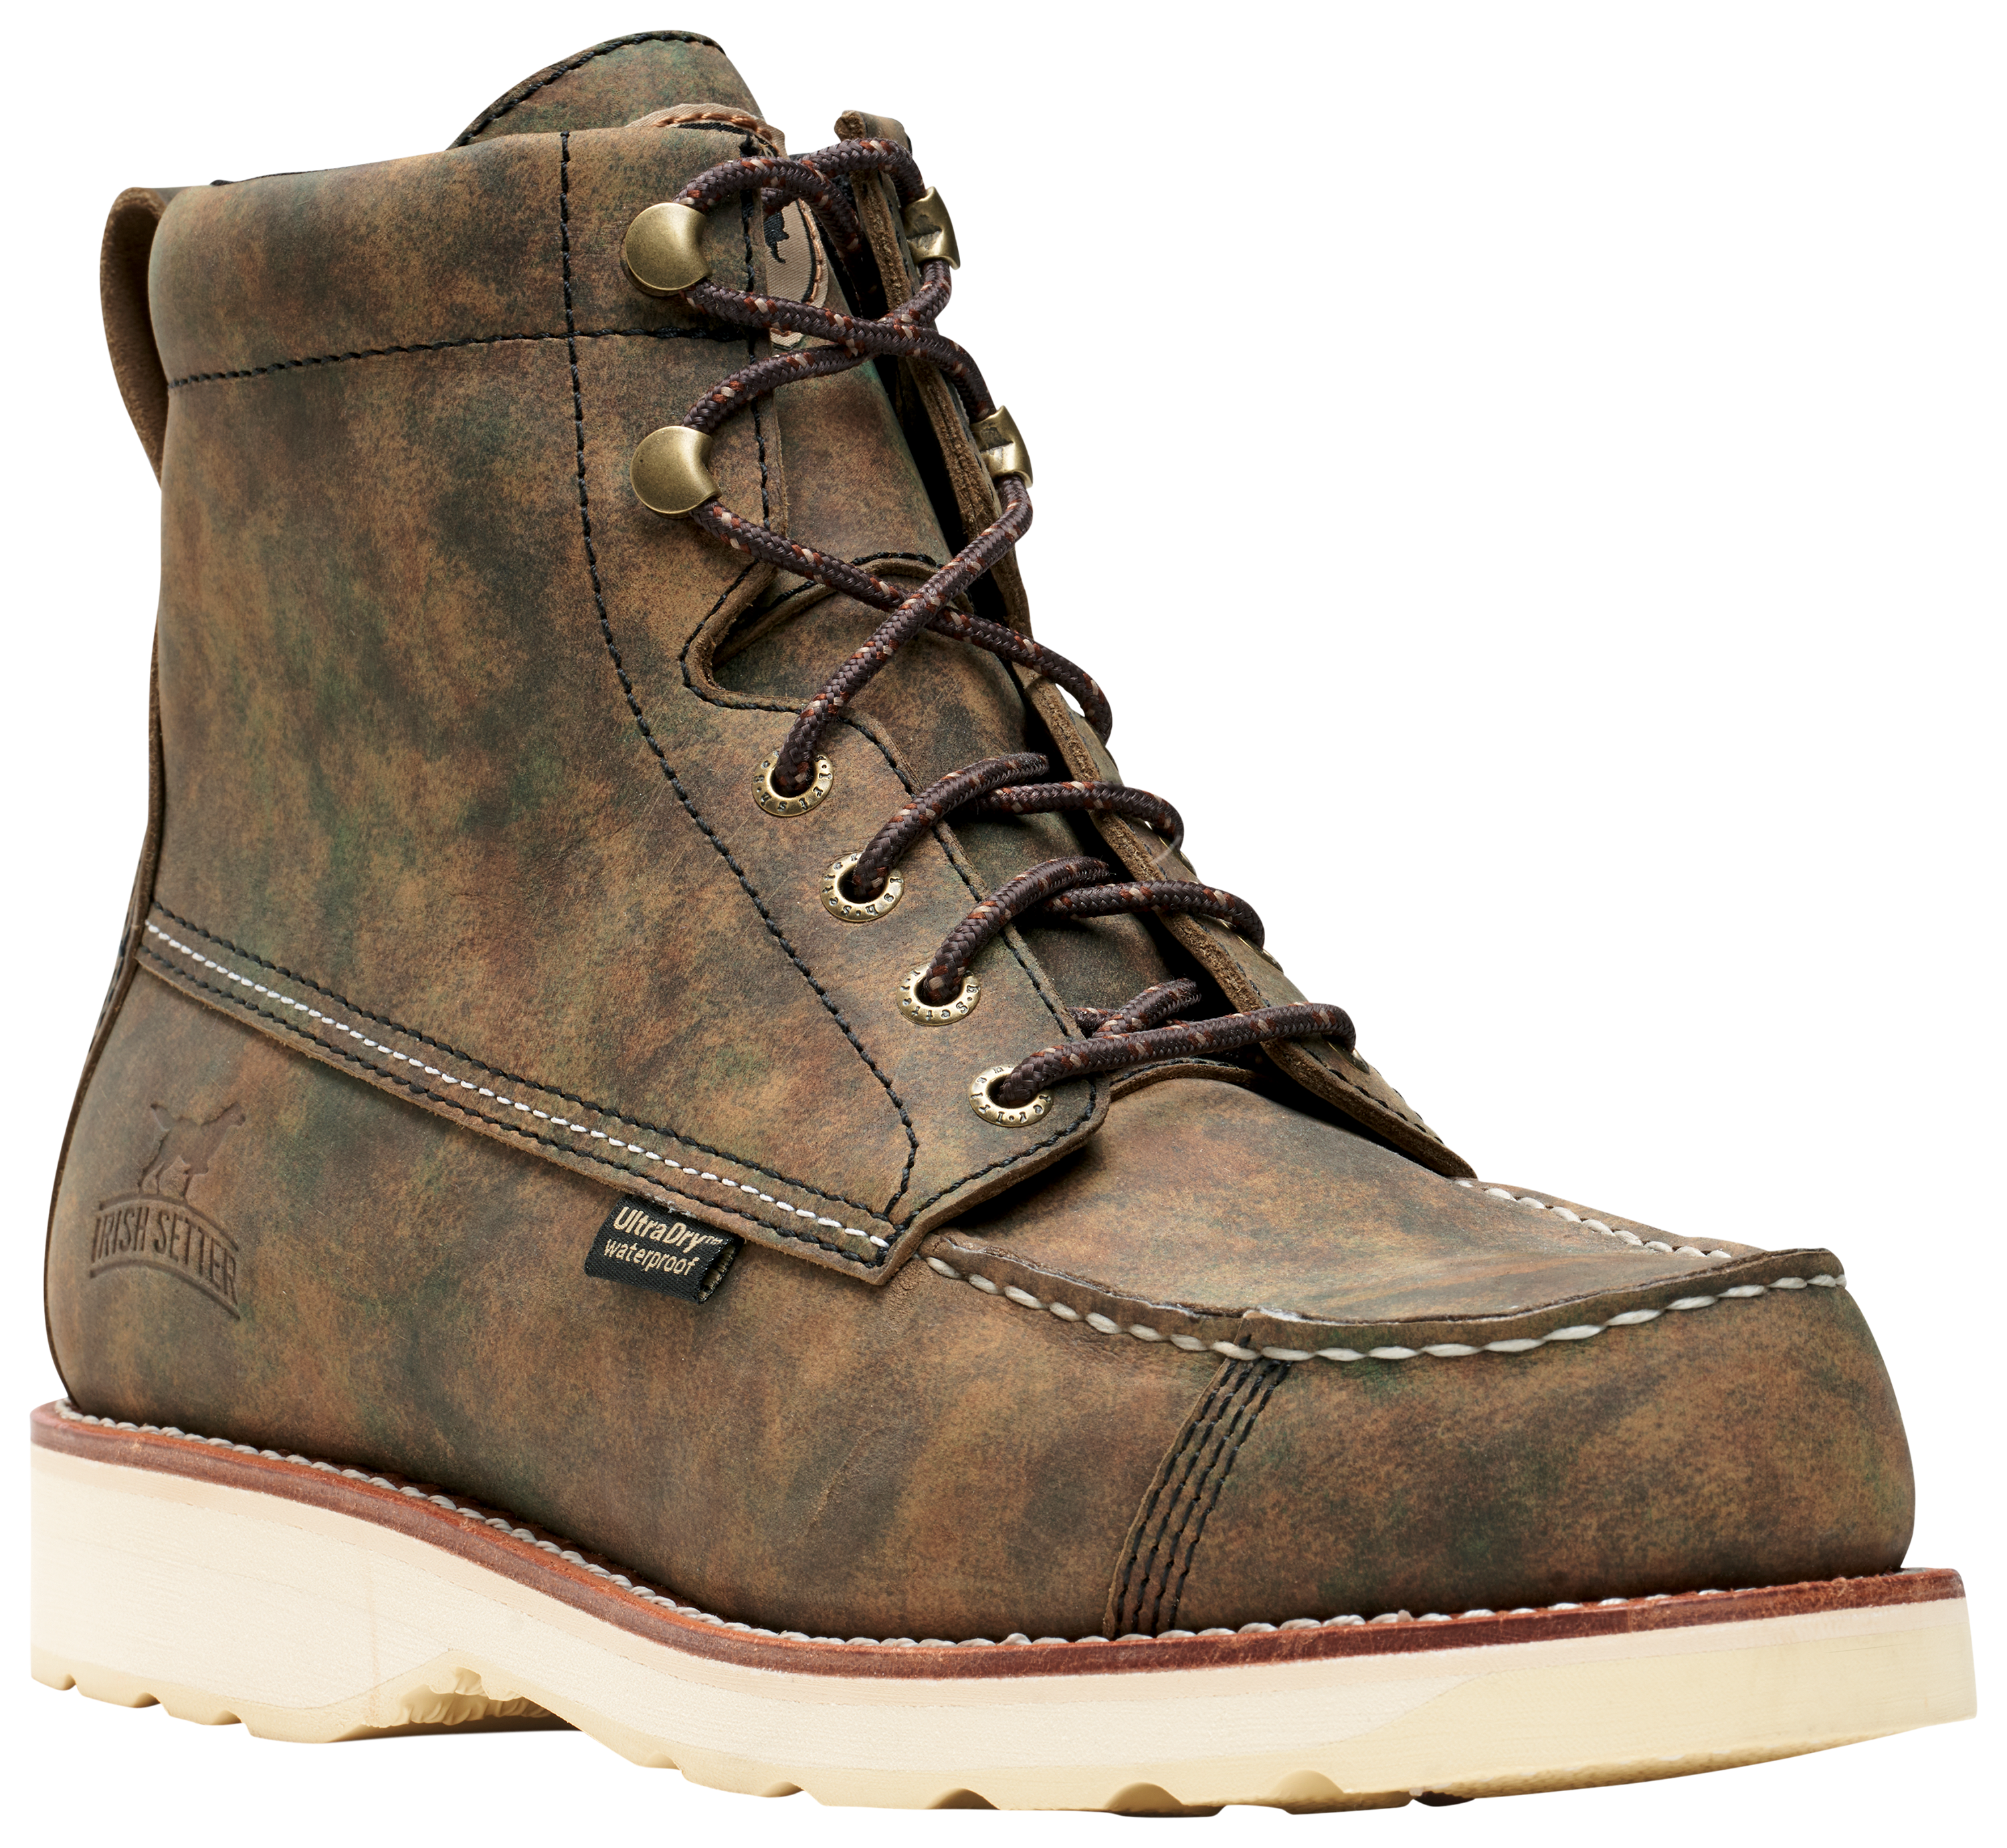 Irish Setter Wingshooter 7 Waterproof Hunting Boots for Men - Earth Camo - 13M